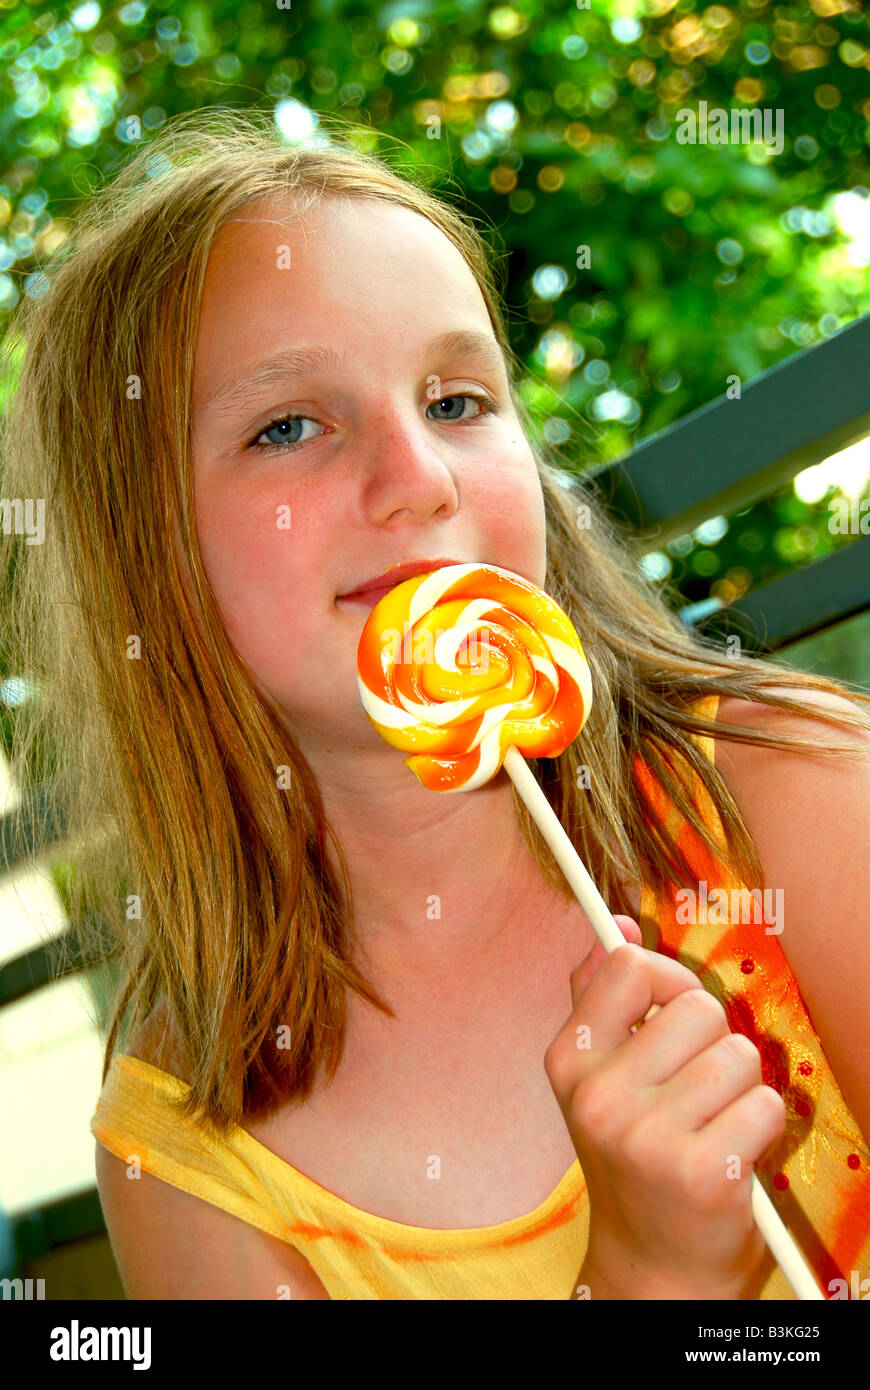 Young girl holding a big colorful lollipop candy Stock Photo